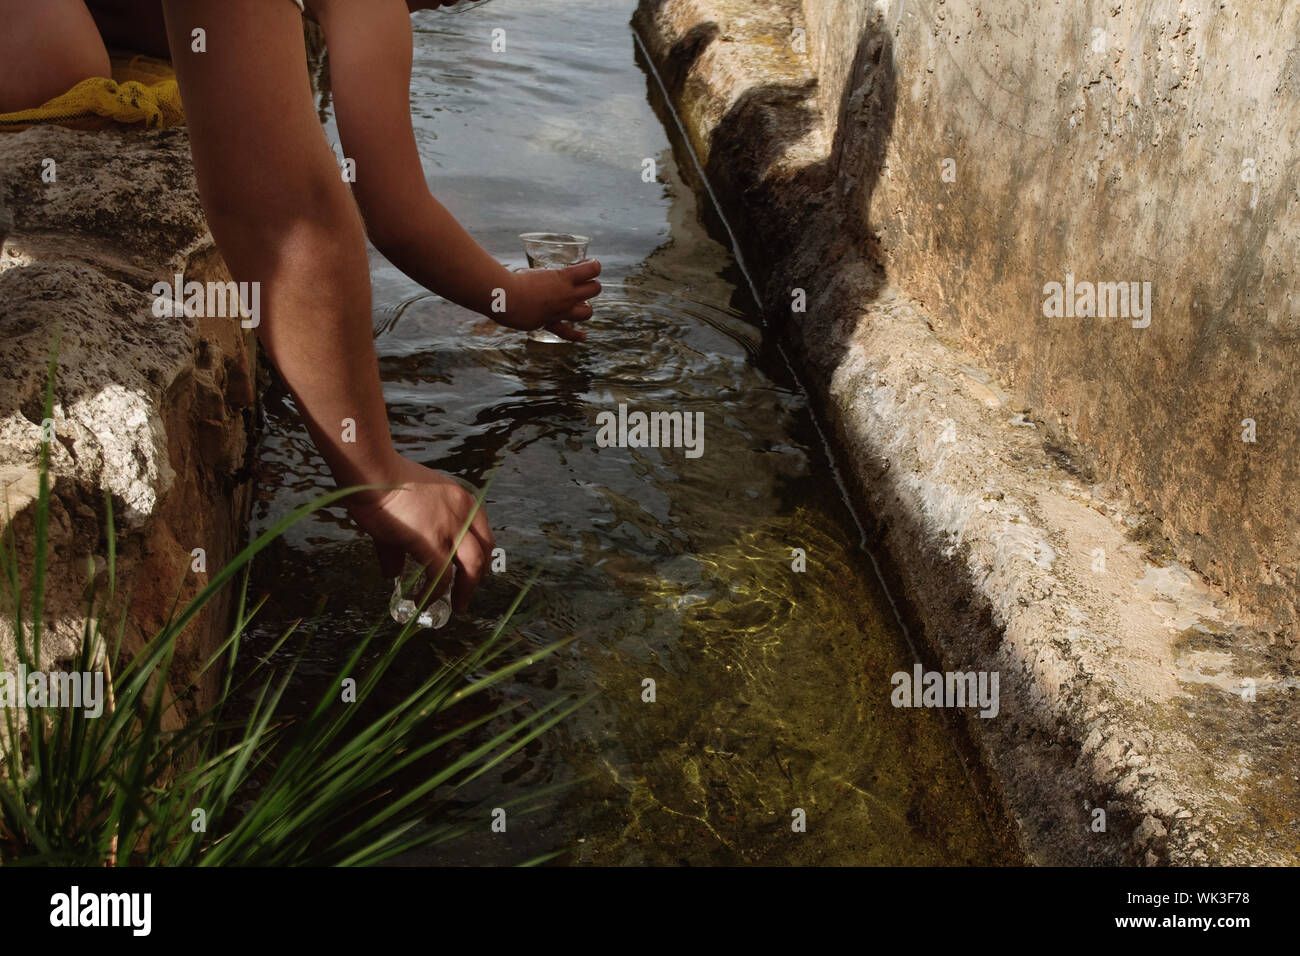 Cropped Image Of Hands Filling Water From Gutter Stock Photo